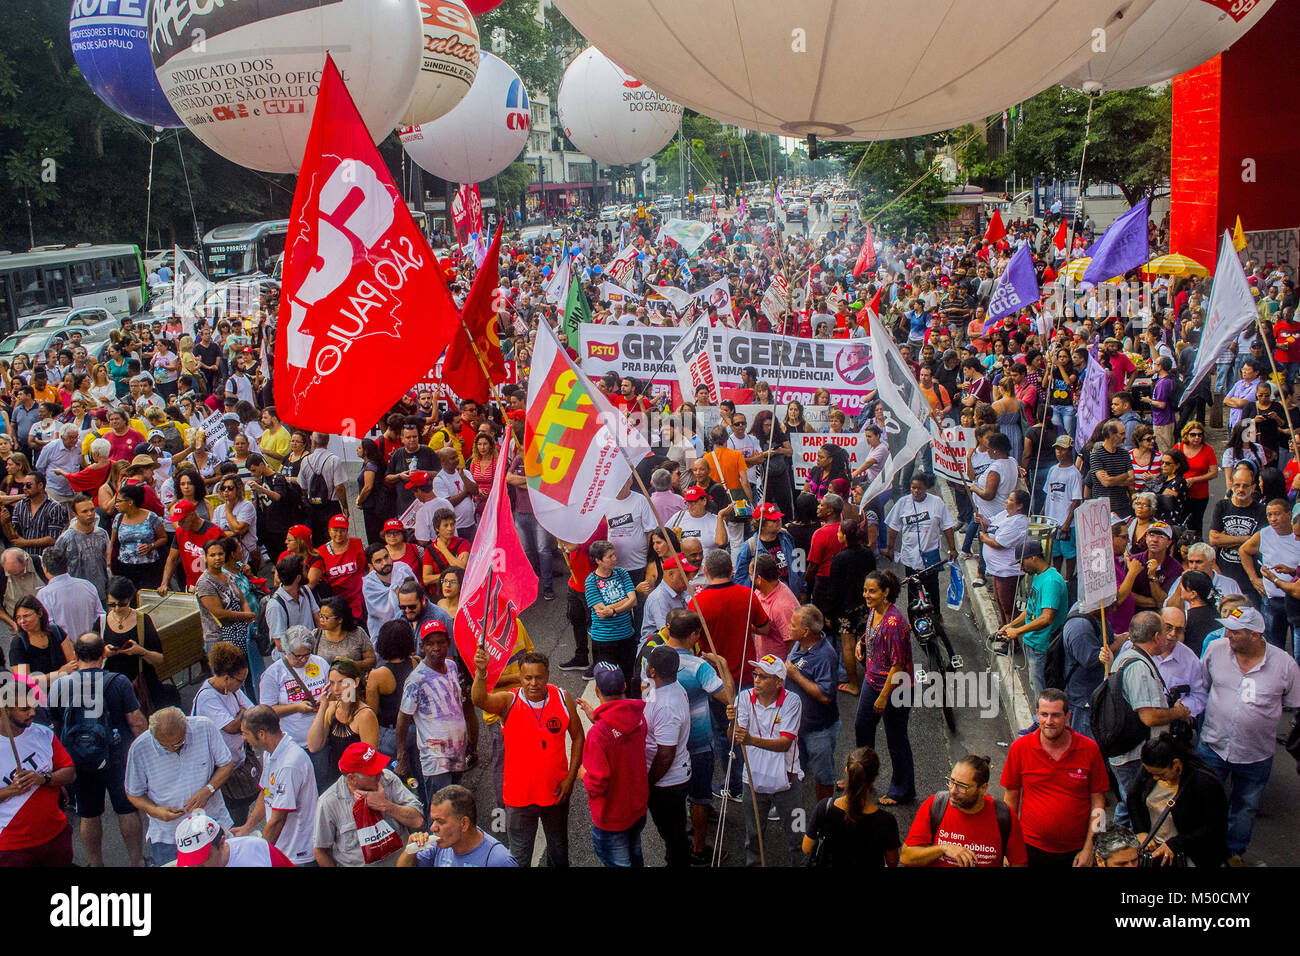 Sao Paulo, Brazil. February 19, 2018 - Demonstrators take part in a protest against the social welfare reform bill introduced by President Michel Temer government which seeks to extend the years of contributions and raise the minimum age for retirement, in Sao Paulo, Brazil, on February 19, 2018. Credit: Cris Faga/ZUMA Wire/Alamy Live News Stock Photo